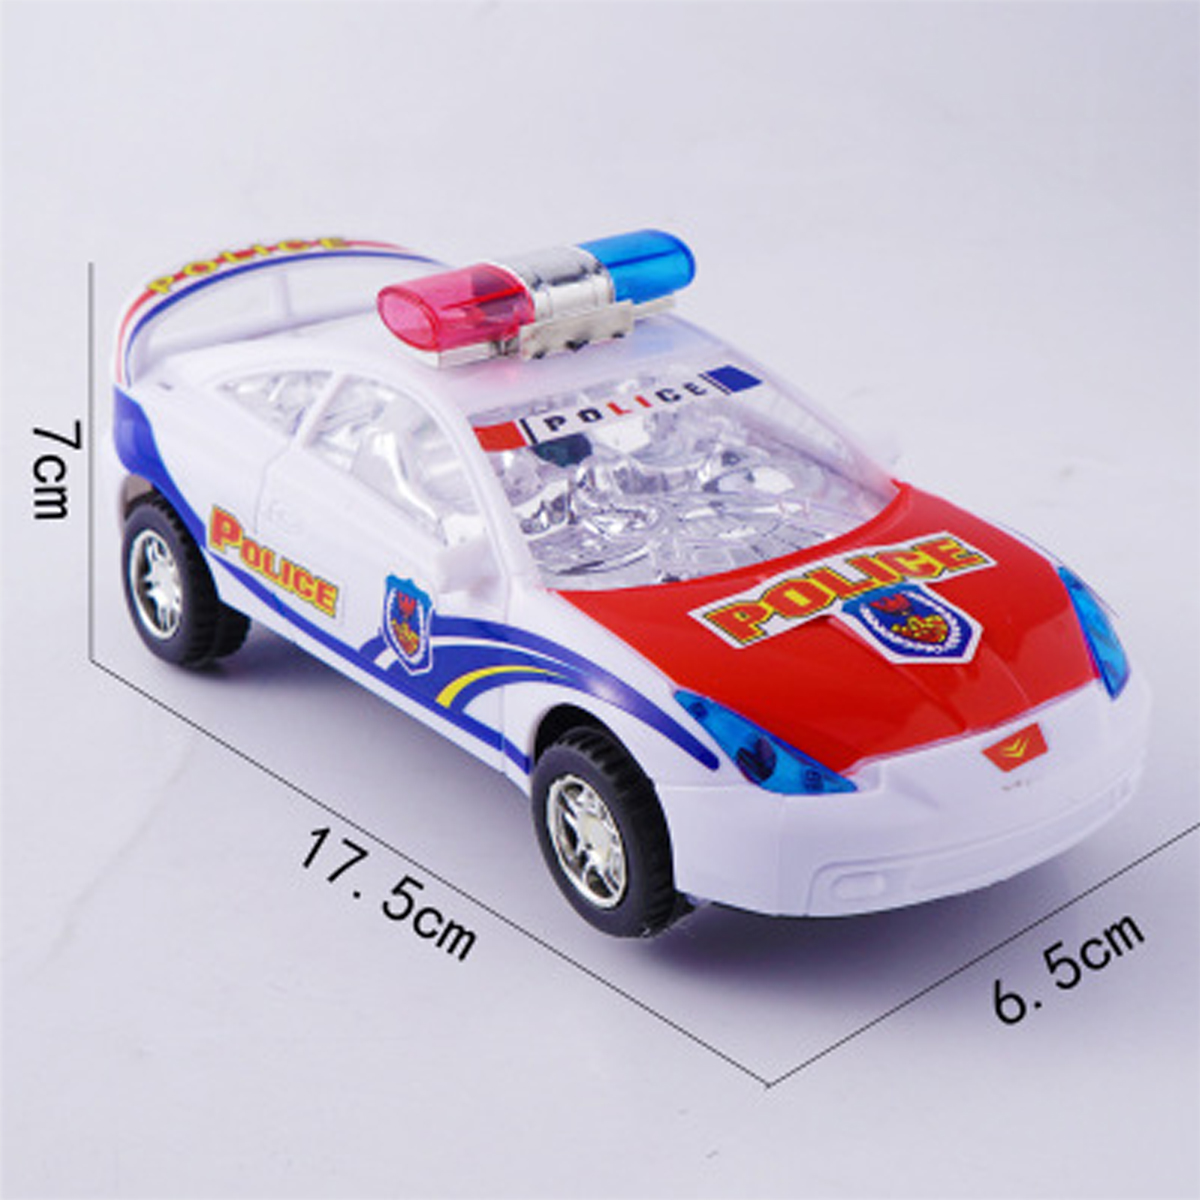 Childrens-Electric-Alloy-Simulation-Po-lice-Car-Diecast-Model-Toy-with-LED-Light-and-Music-1604579-10